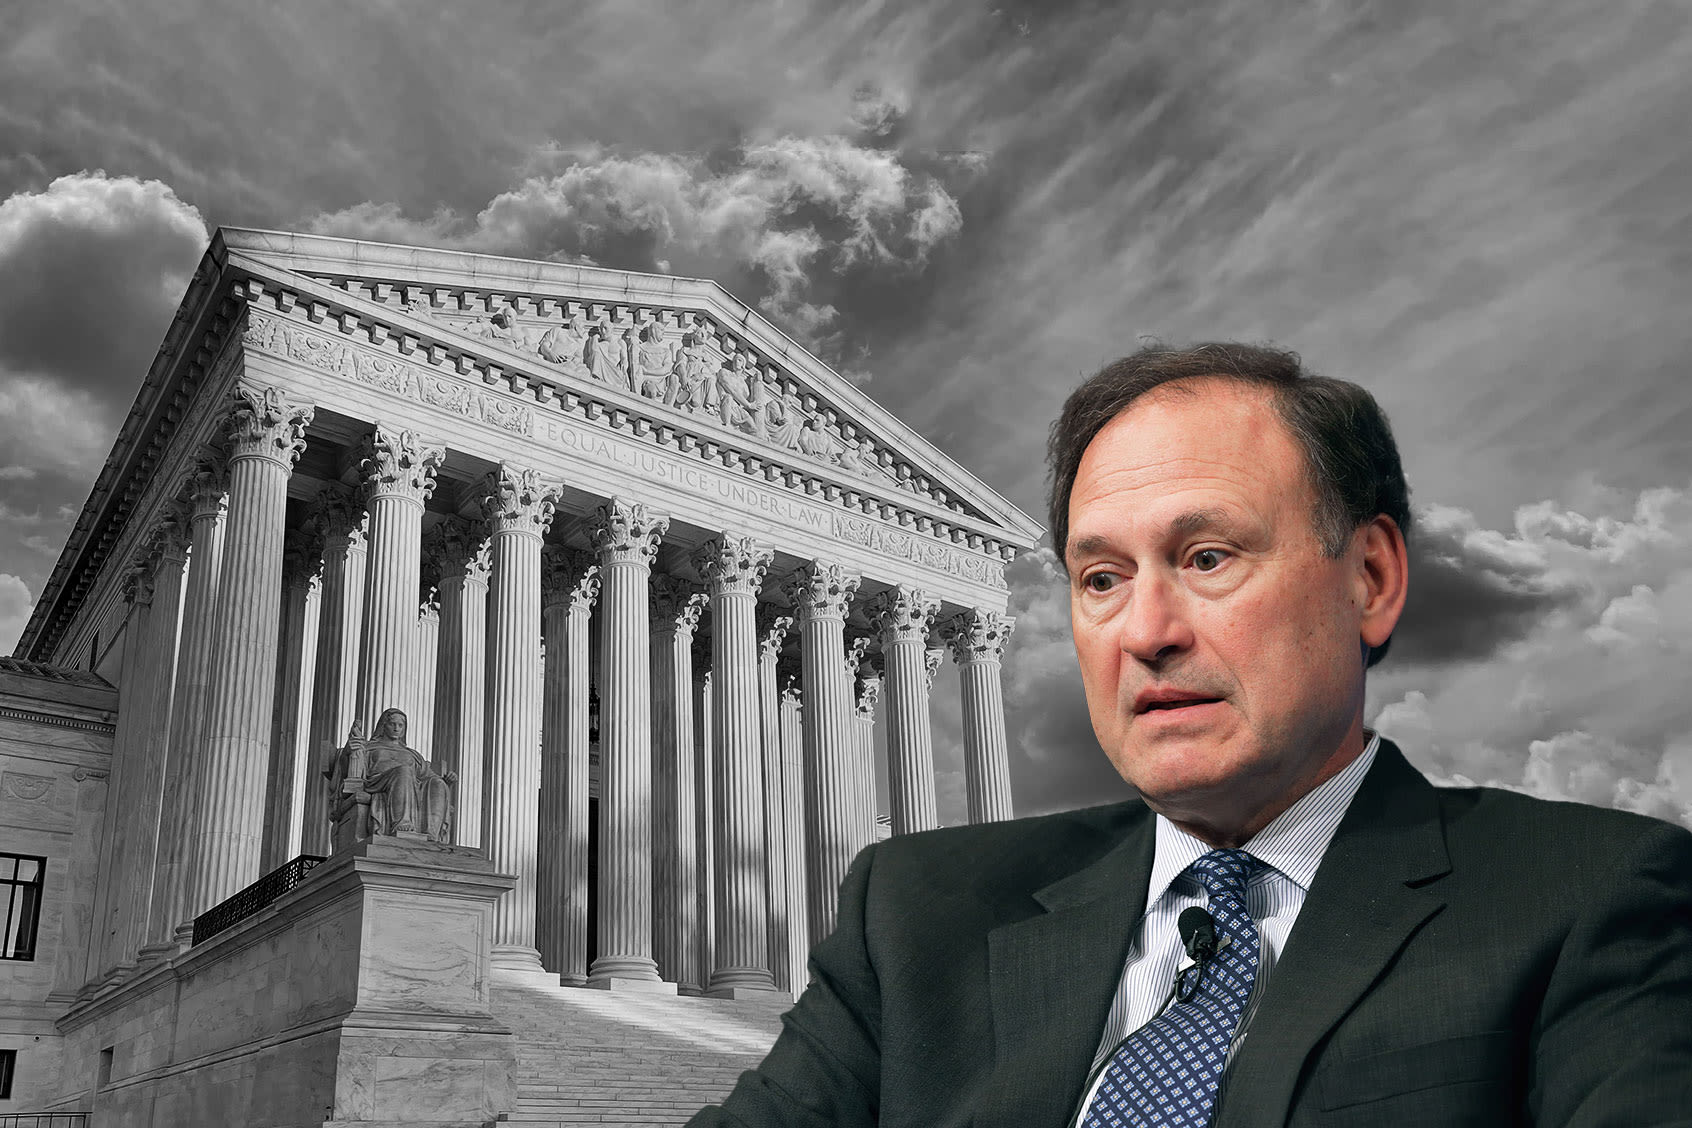 “Enormous implications”: Legal experts say Alito’s abortion dissent signals a “gathering storm”